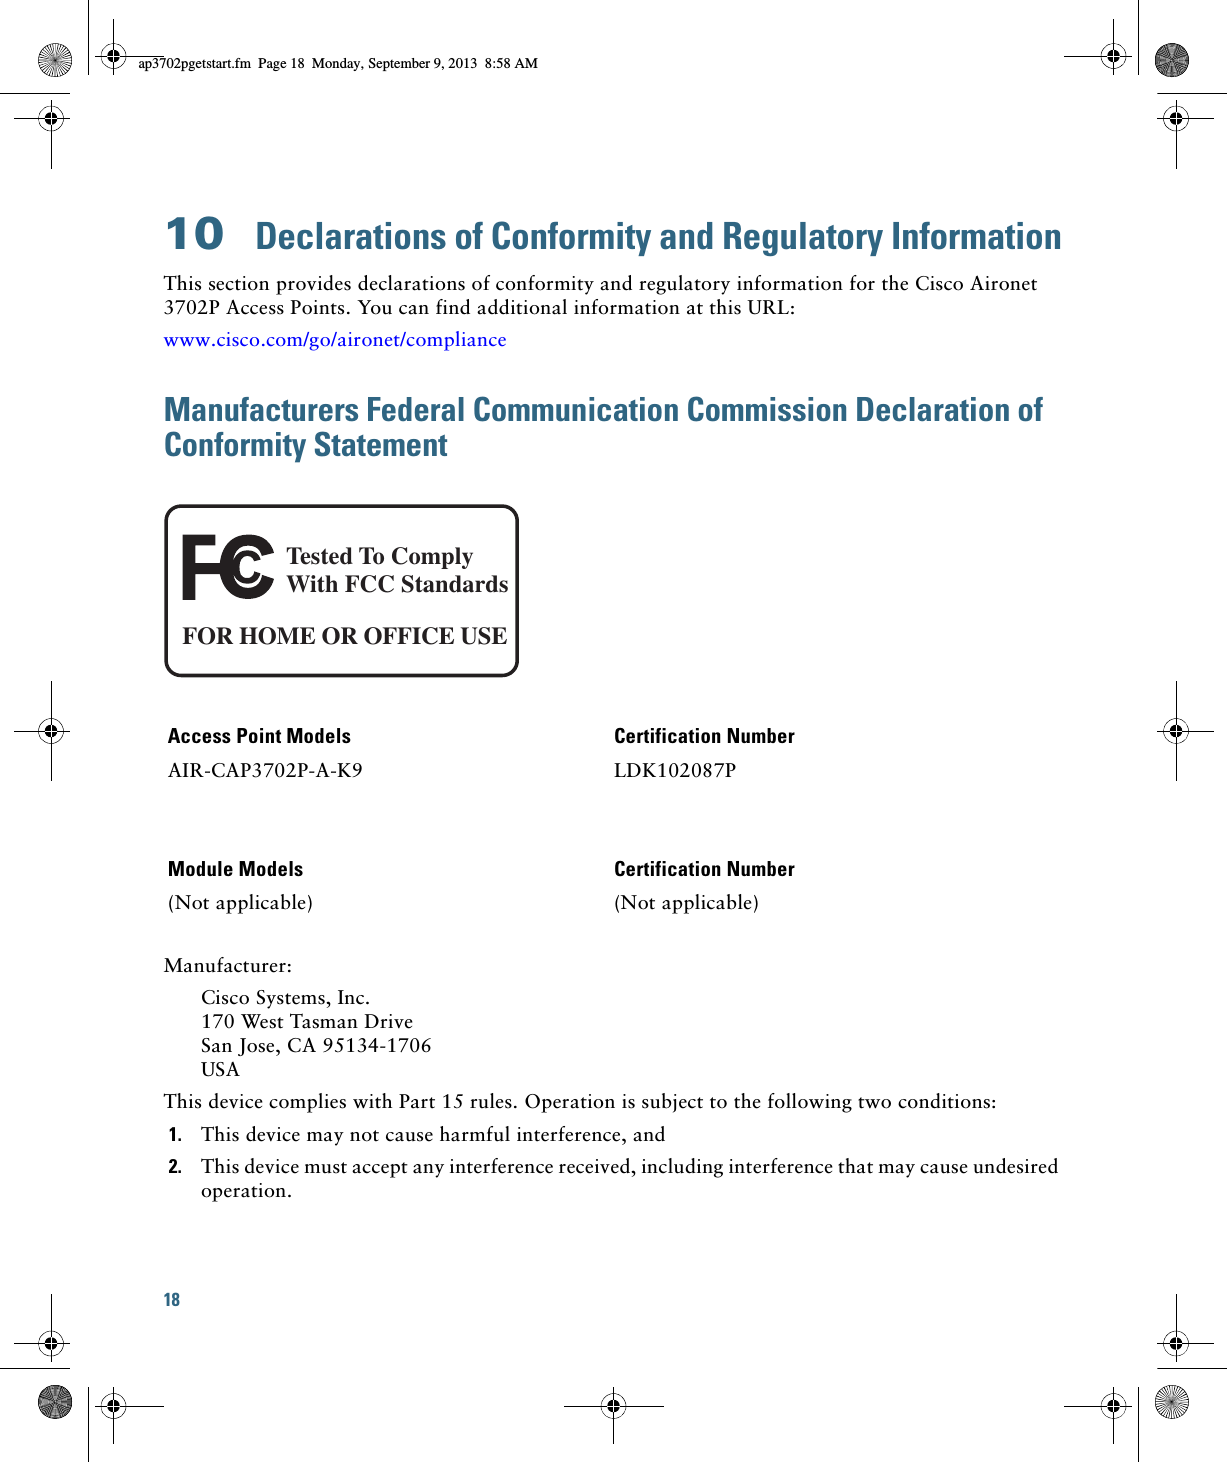 18 10  Declarations of Conformity and Regulatory InformationThis section provides declarations of conformity and regulatory information for the Cisco Aironet 3702P Access Points. You can find additional information at this URL:www.cisco.com/go/aironet/complianceManufacturers Federal Communication Commission Declaration of Conformity StatementManufacturer:Cisco Systems, Inc. 170 West Tasman Drive San Jose, CA 95134-1706 USAThis device complies with Part 15 rules. Operation is subject to the following two conditions:1. This device may not cause harmful interference, and2. This device must accept any interference received, including interference that may cause undesired operation.Access Point Models Certification NumberAIR-CAP3702P-A-K9 LDK102087PModule Models Certification Number(Not applicable) (Not applicable)Tested To ComplyWith FCC StandardsFOR HOME OR OFFICE USEap3702pgetstart.fm  Page 18  Monday, September 9, 2013  8:58 AM